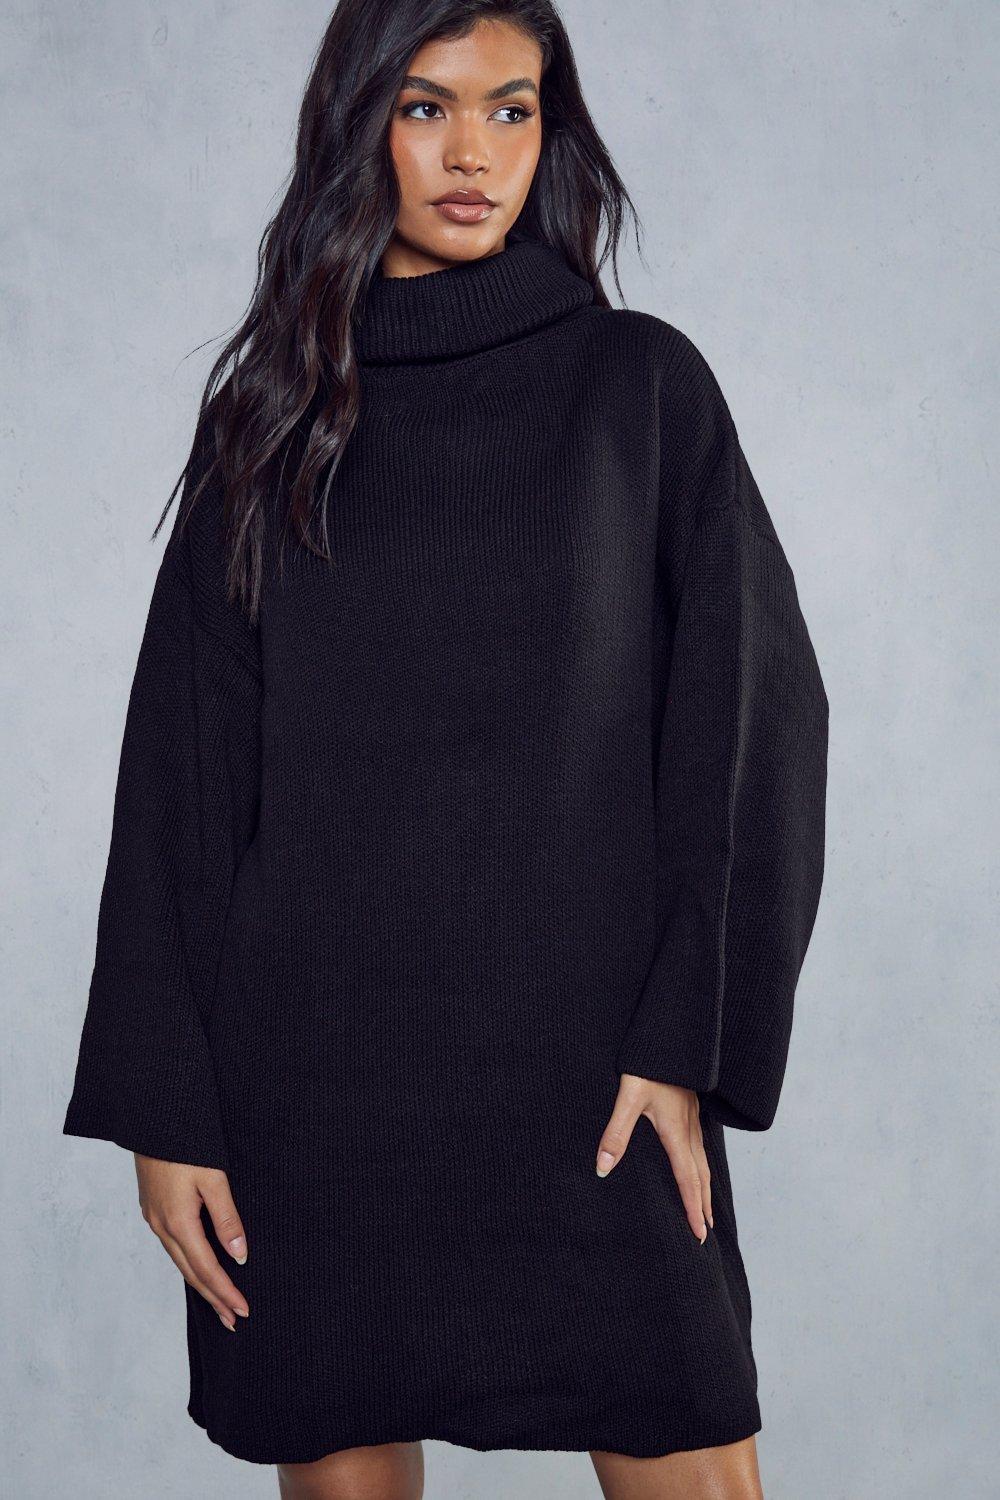 Oversized Turtle Neck Knitted Dress